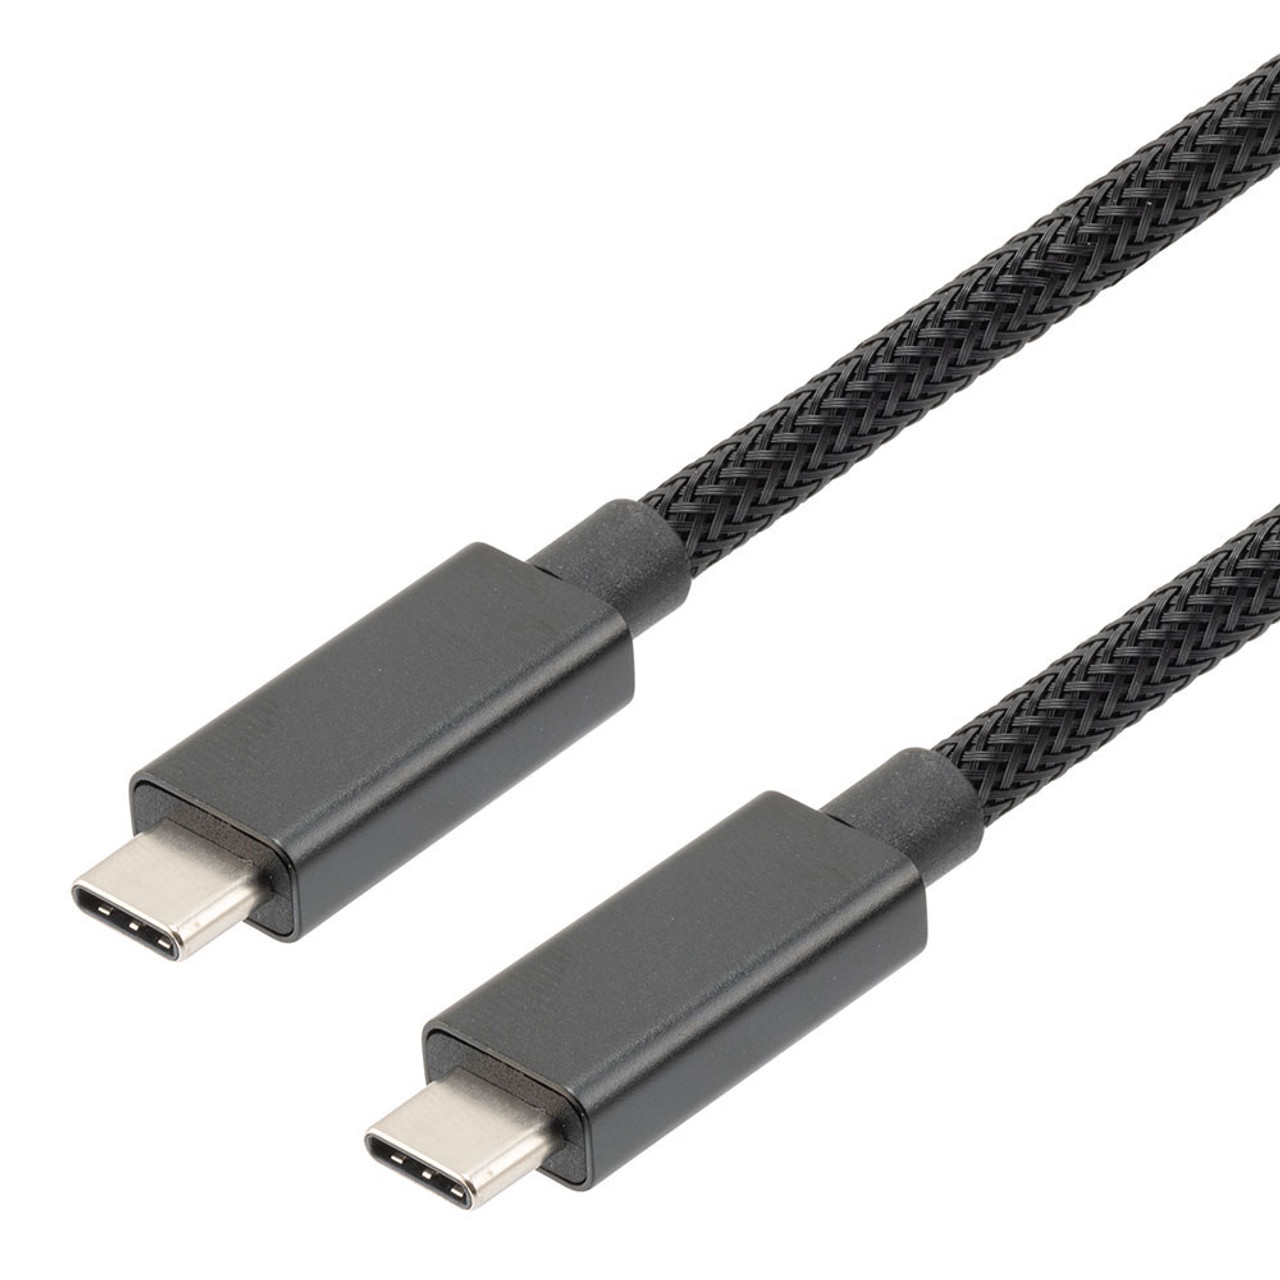 NavePoint USB C 3.1 Male to USB C 3.1 Male Cable, Aluminum Shell, Supports 20 Volts/5 Amps, 10 Gbps, Black Nylon Braid, 2M Length